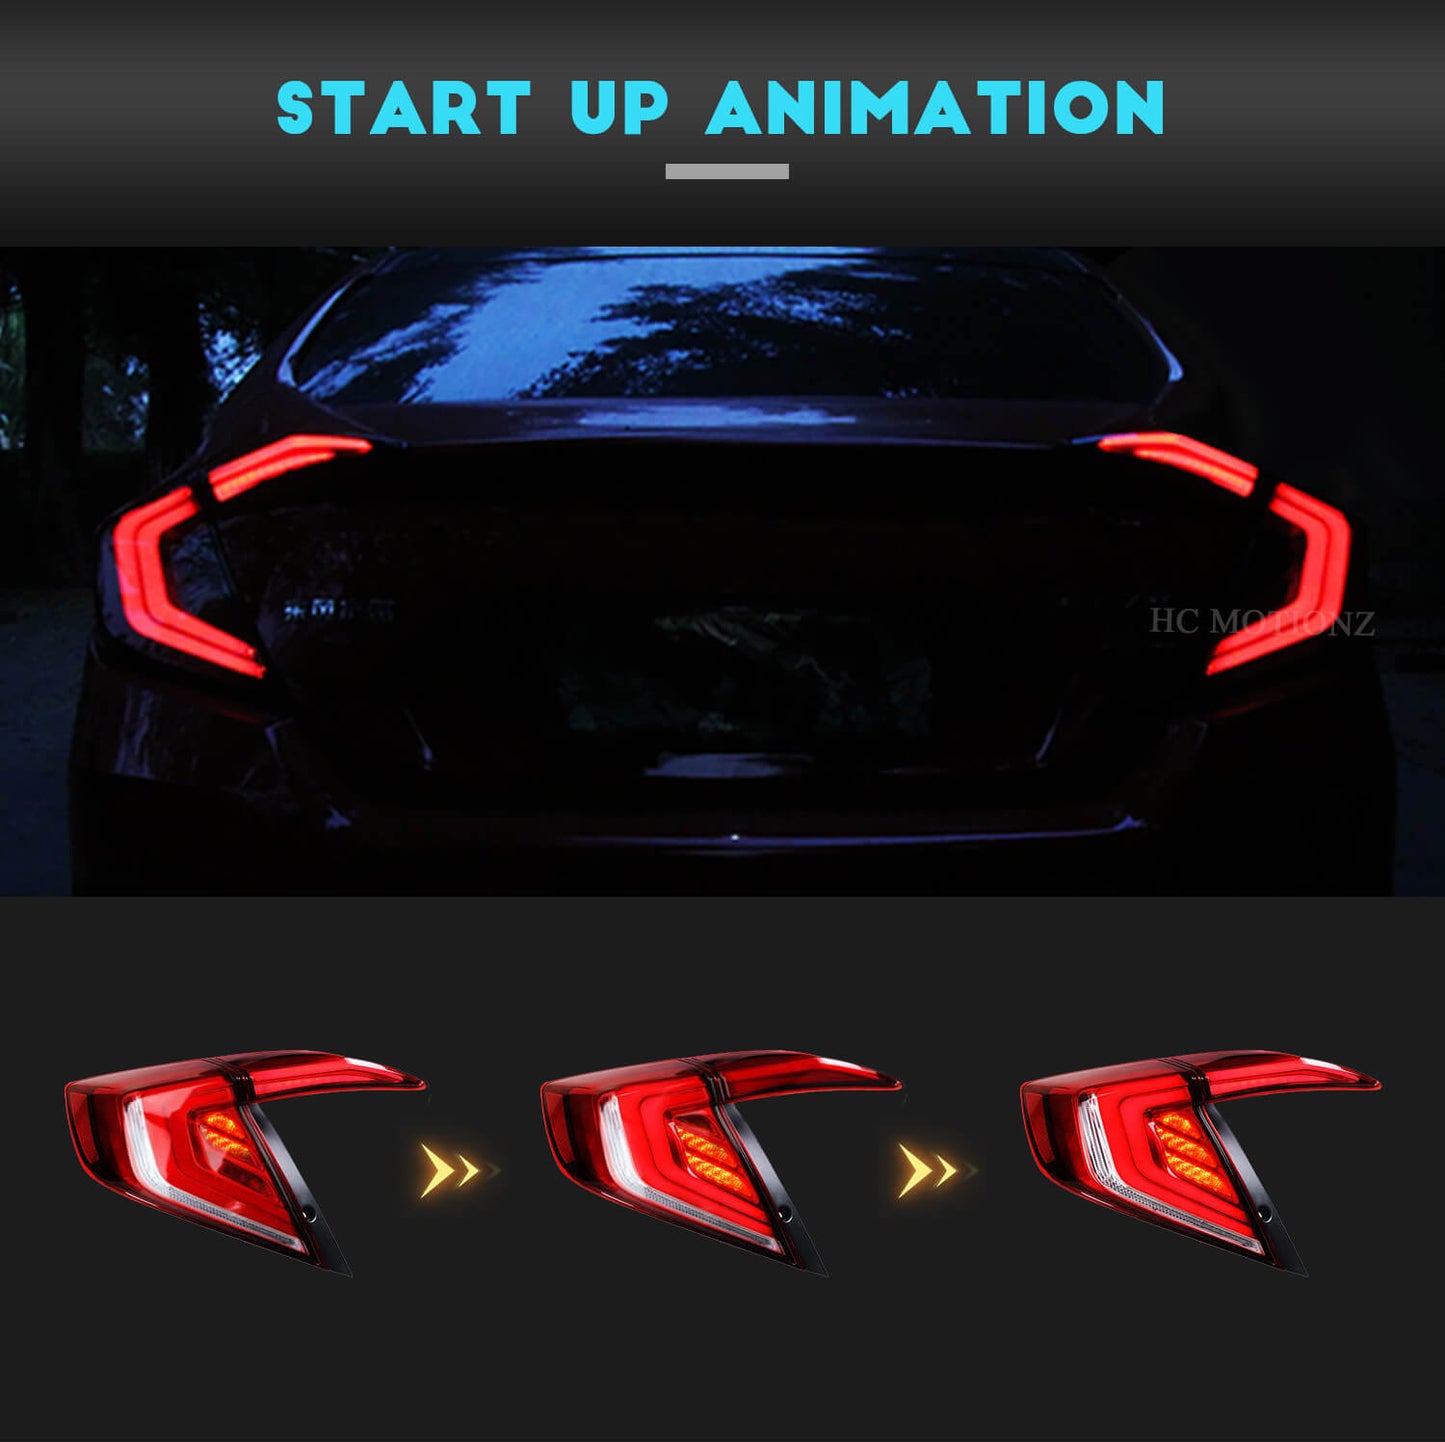 HCMOTION LED Tail Lights for Honda Civic 2016-2021 DRL Start Up Animation Rear Lamp Assembly